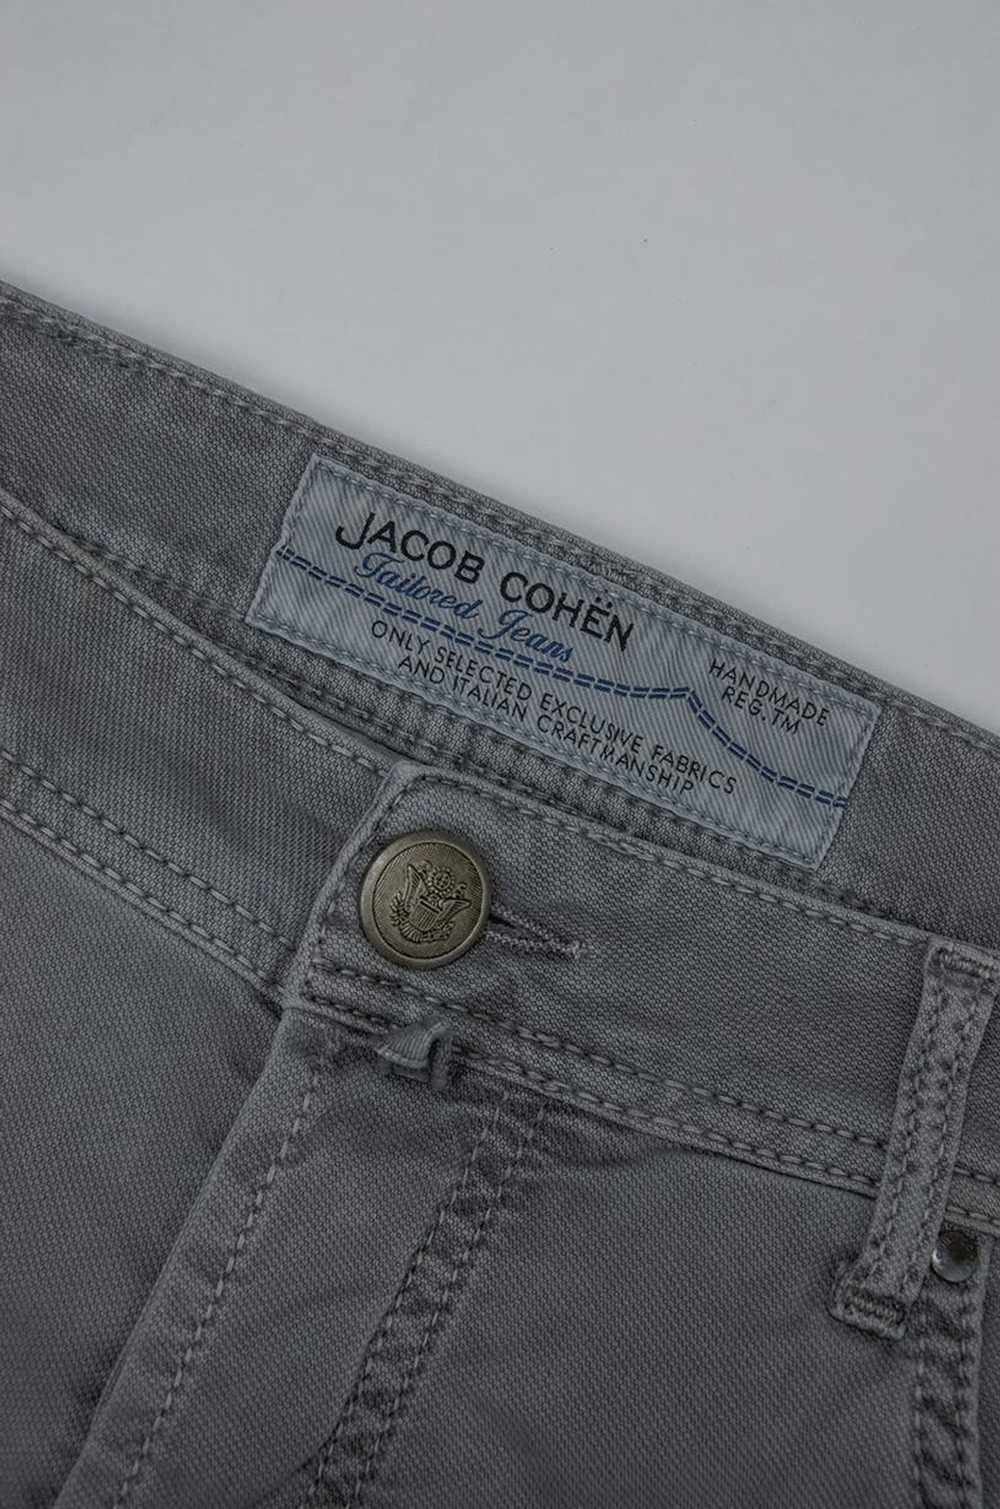 Jacob Cohen JACOB COHER Tailored Gray Jeans - image 5